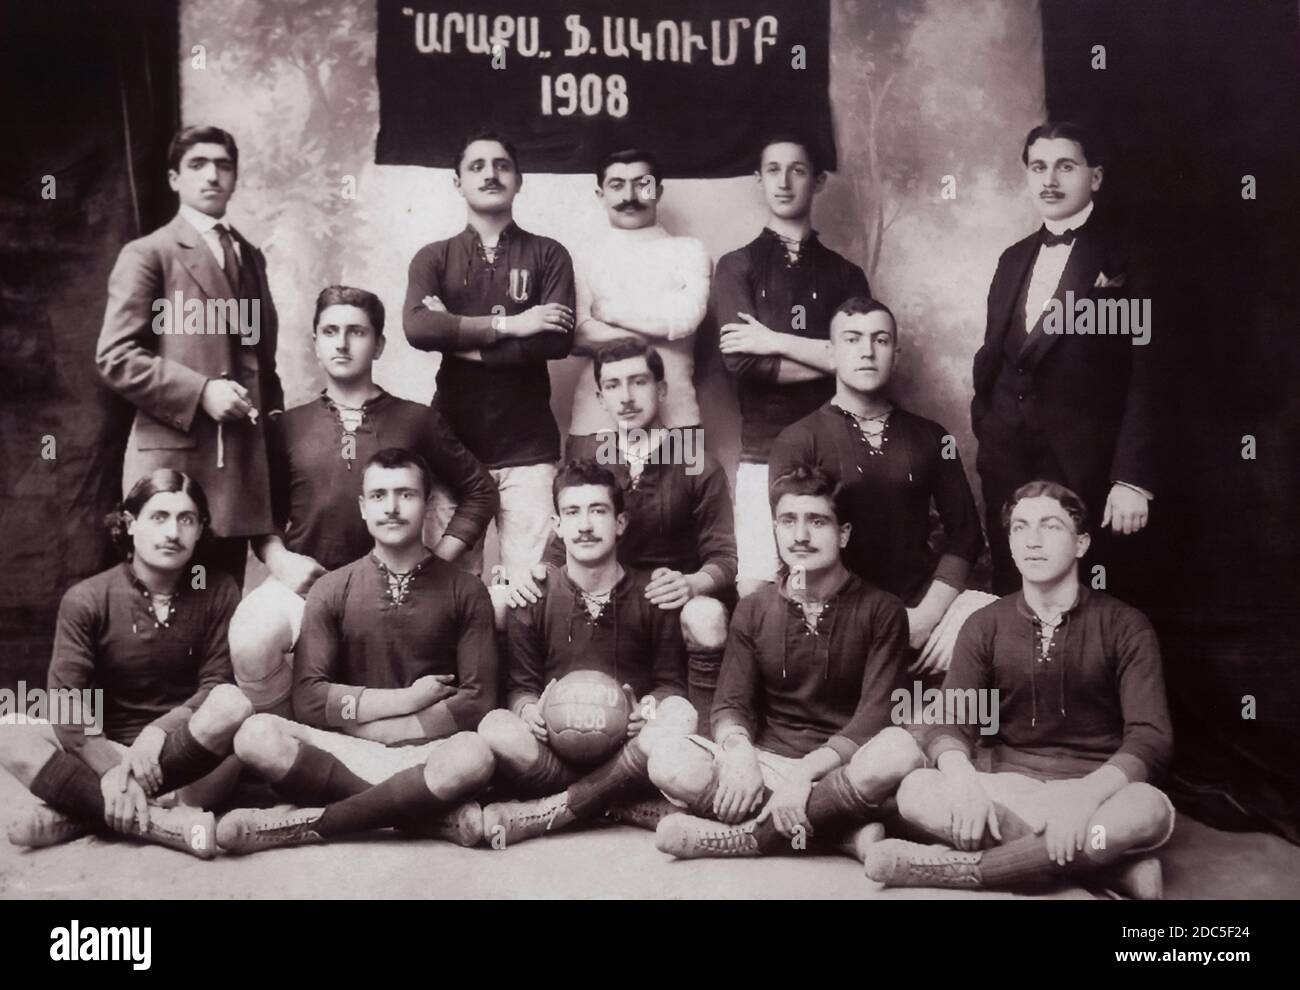 All about Old Armenian! — Armenian Institute